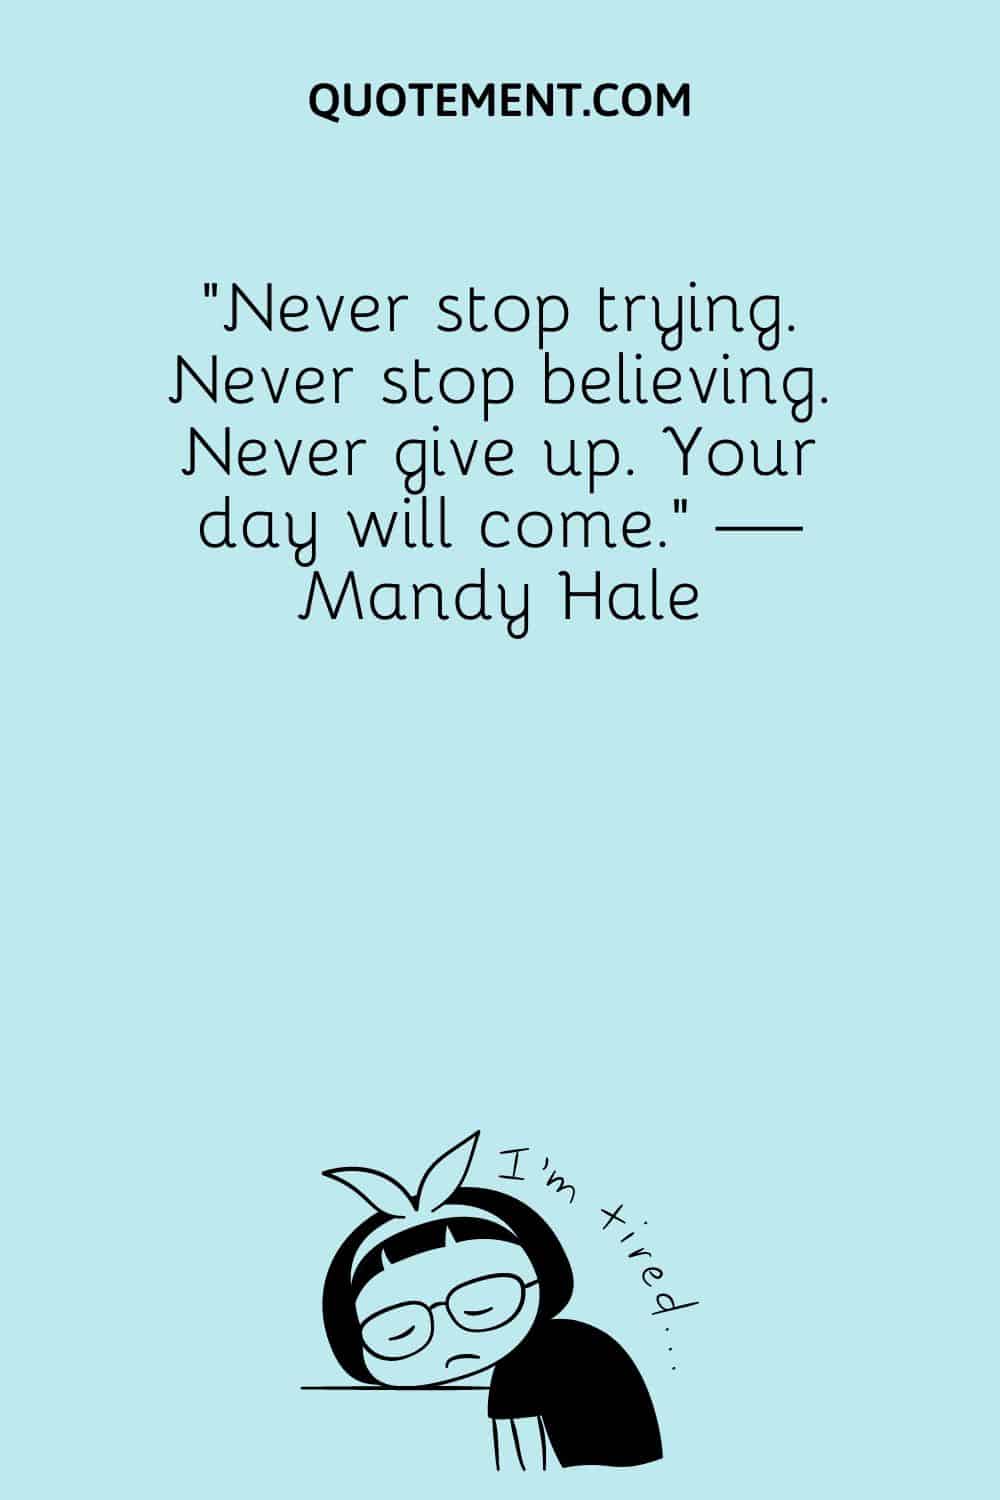 Never stop trying. Never stop believing. Never give up.